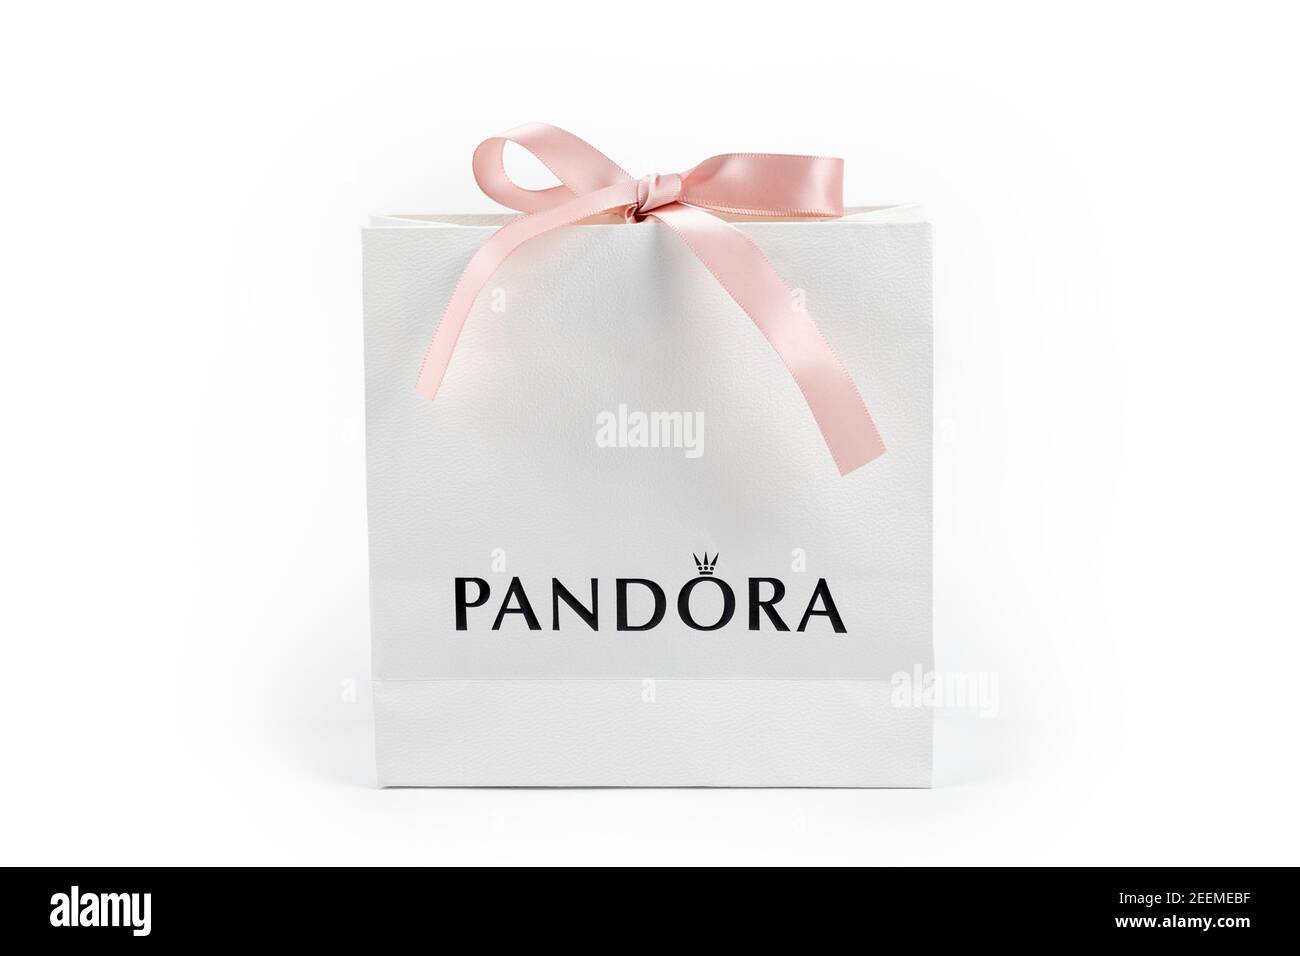 KYIV, UKRAINE - FEBRUARY 11, 2021: Pandora paper bag with pink bow and pink boxes. Famous for its bracelets charms brand is a manufacturer of jew Stock Photo - Alamy